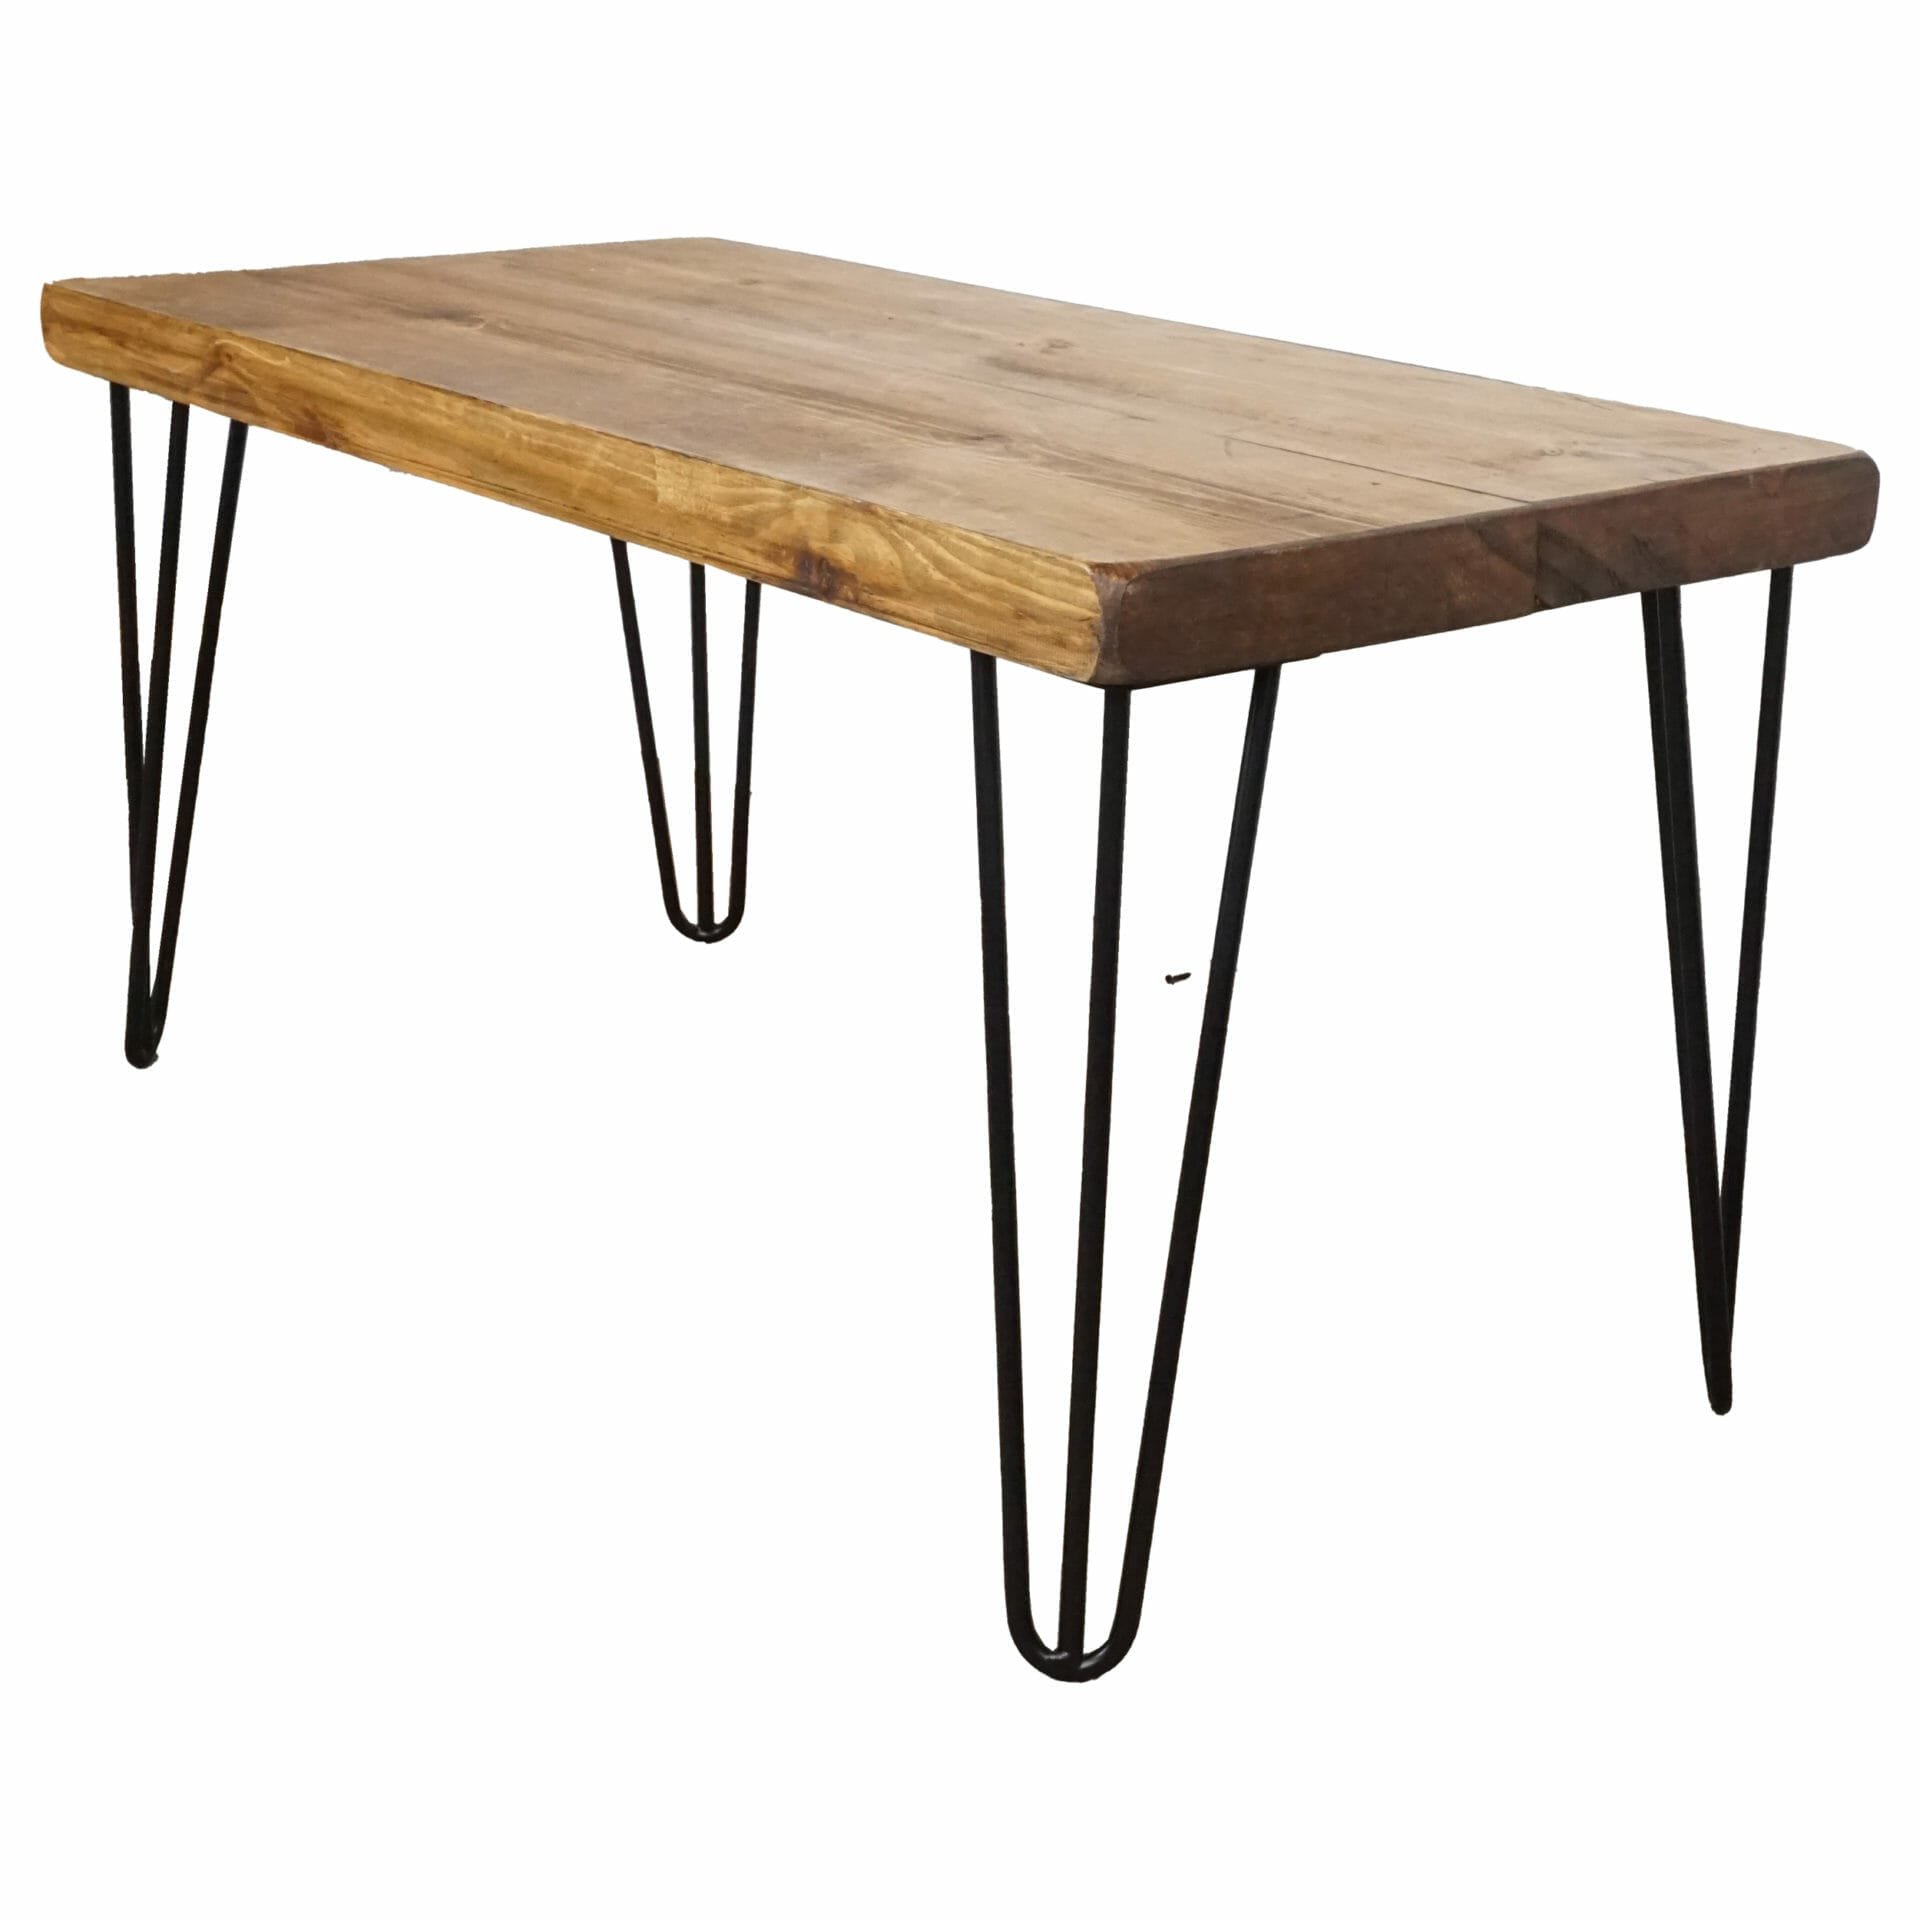 Reclaimed wooden table with steel black hairpin legs